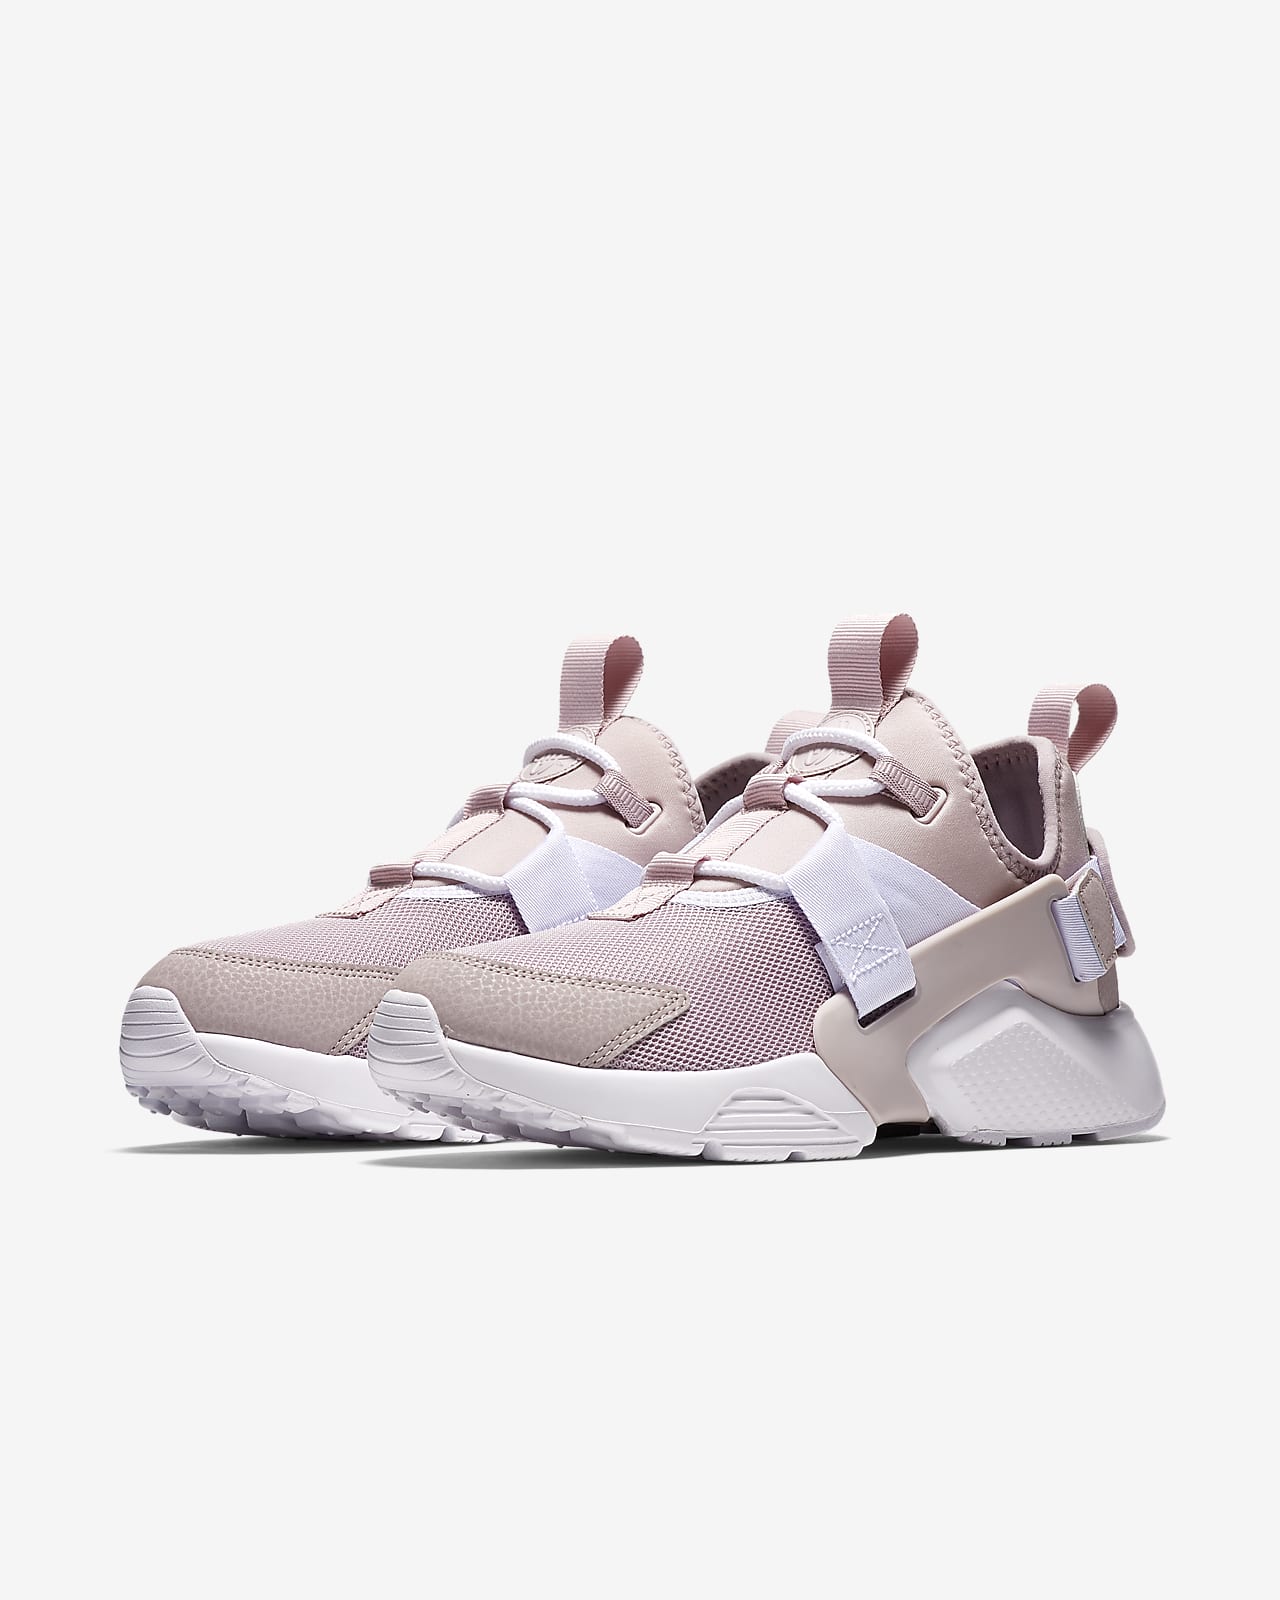 nike huarache city low particle rose